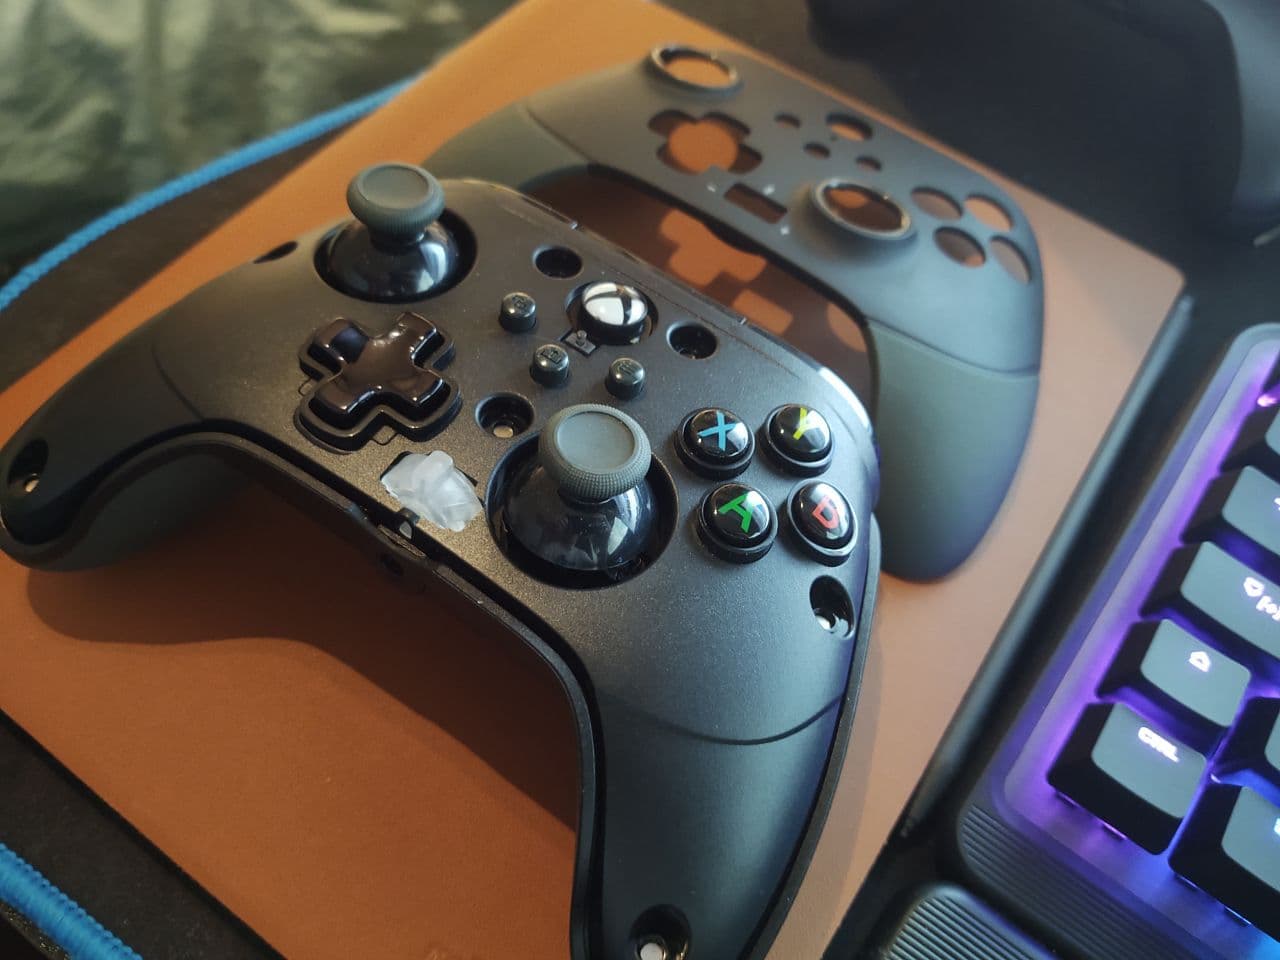 PowerA Fusion Pro 2 Wired Controller for Xbox Series X|S Review (Hardware)  - Official GBAtemp Review | GBAtemp.net - The Independent Video Game  Community